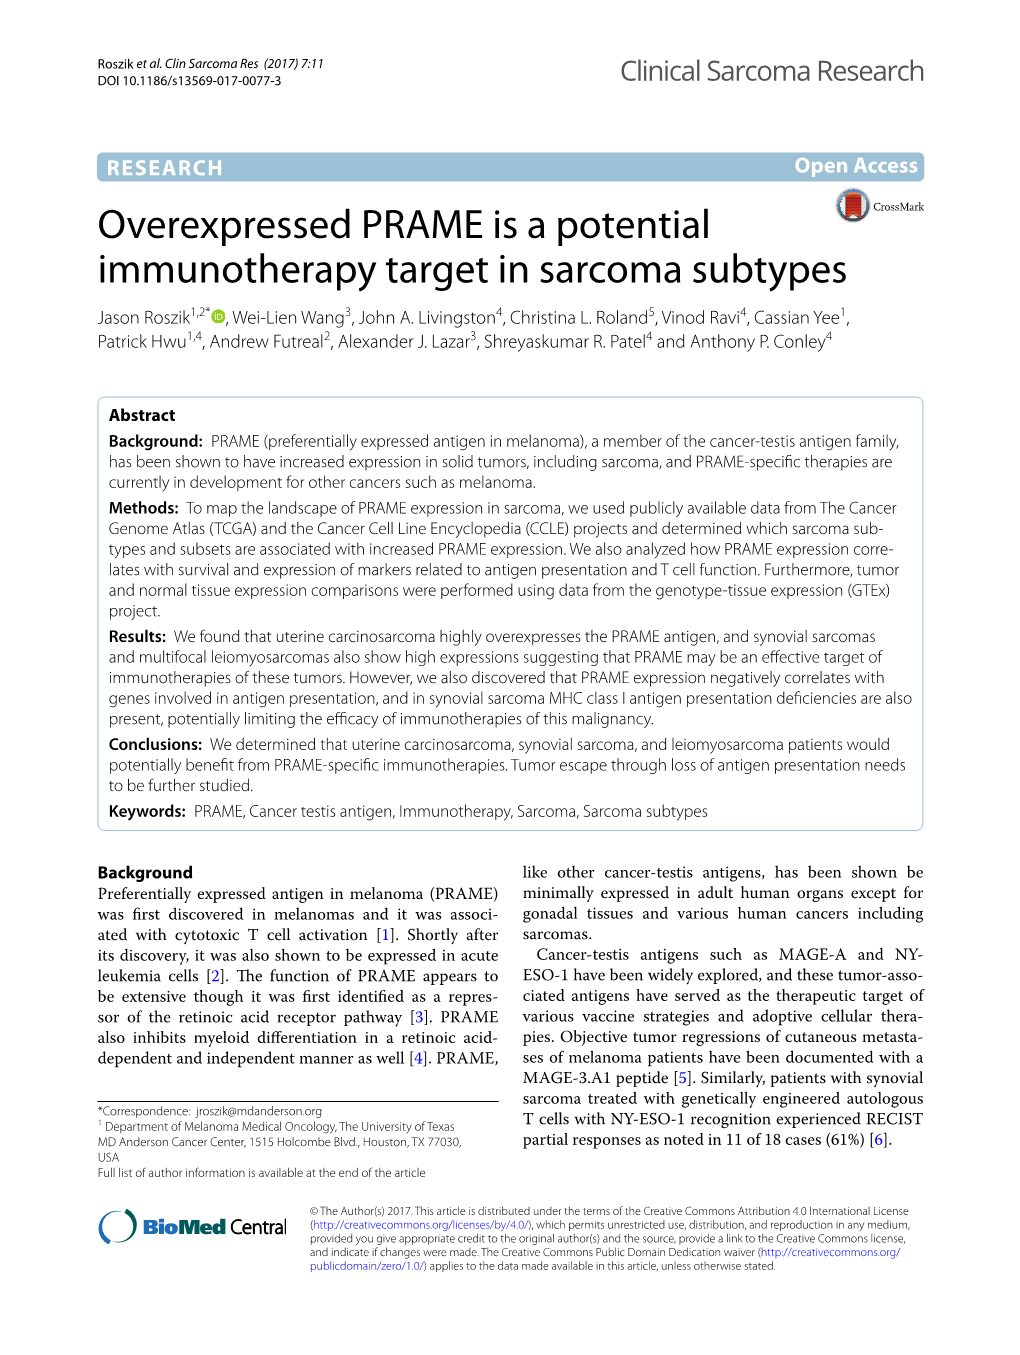 Overexpressed PRAME Is a Potential Immunotherapy Target in Sarcoma Subtypes Jason Roszik1,2* , Wei‑Lien Wang3, John A